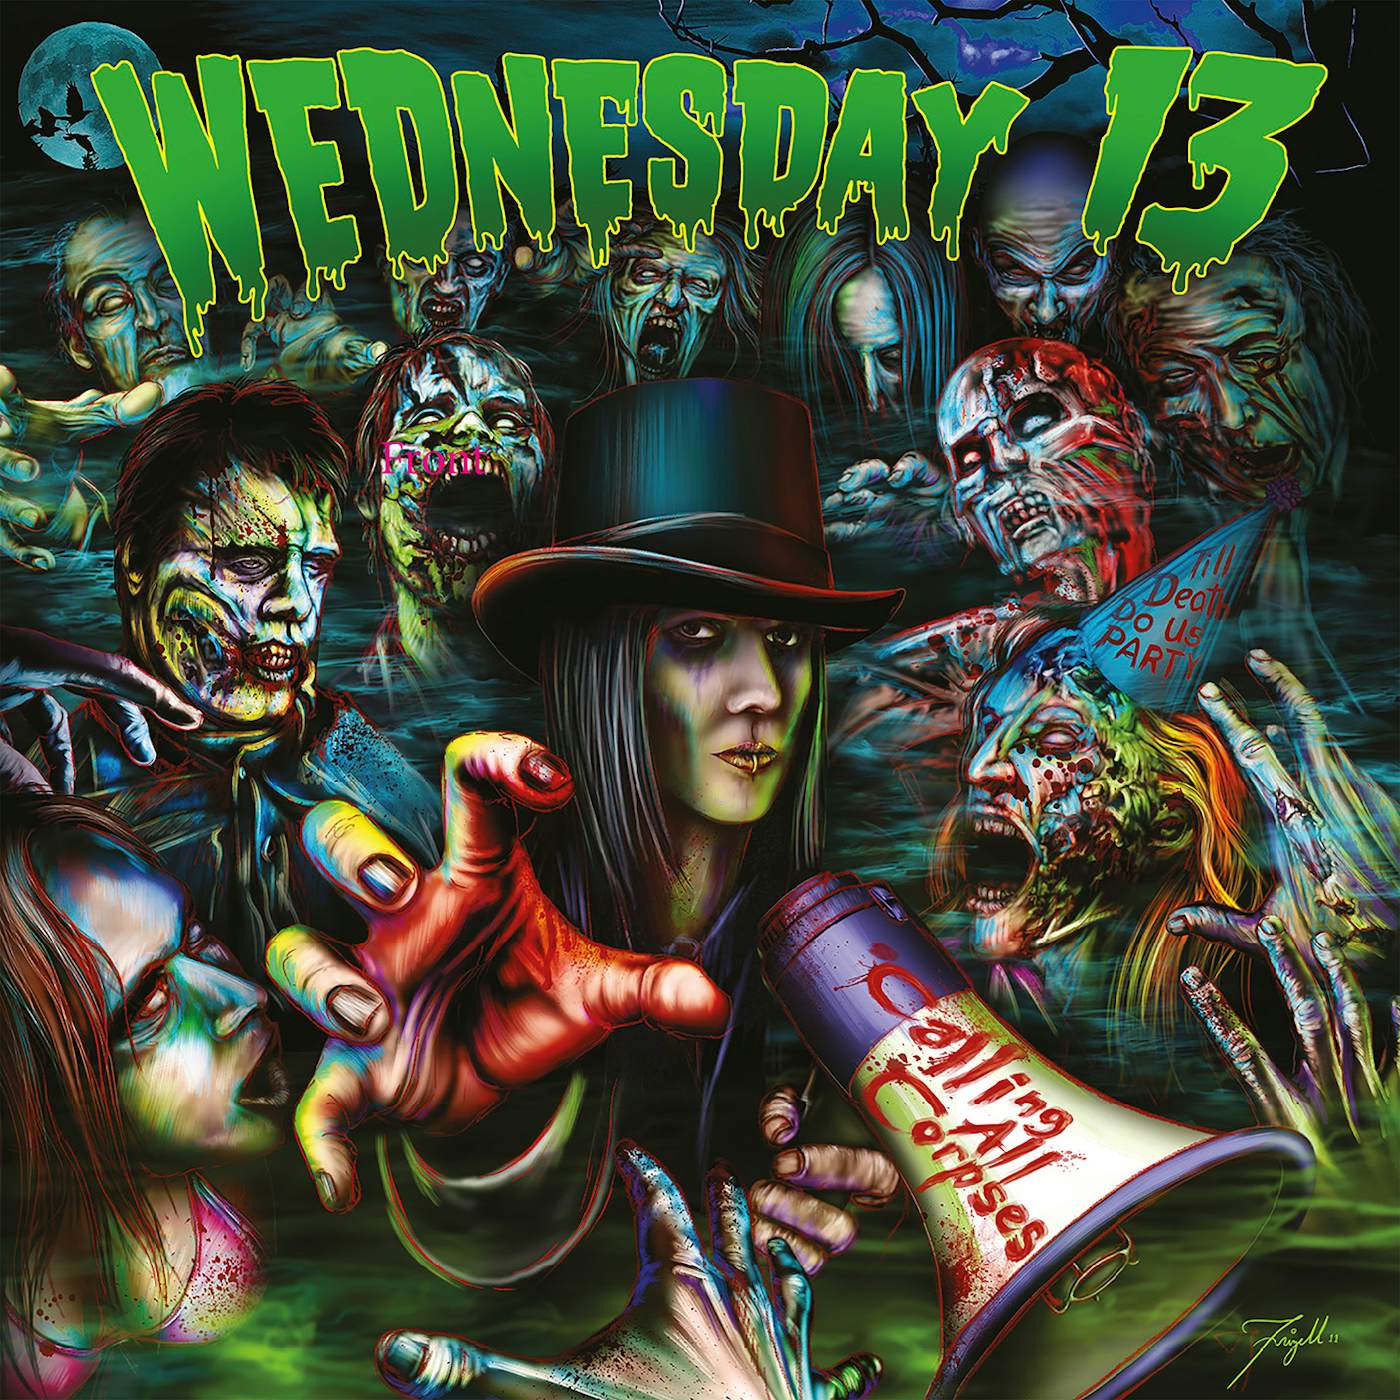 Wednesday 13 Calling All Corpses Vinyl Record